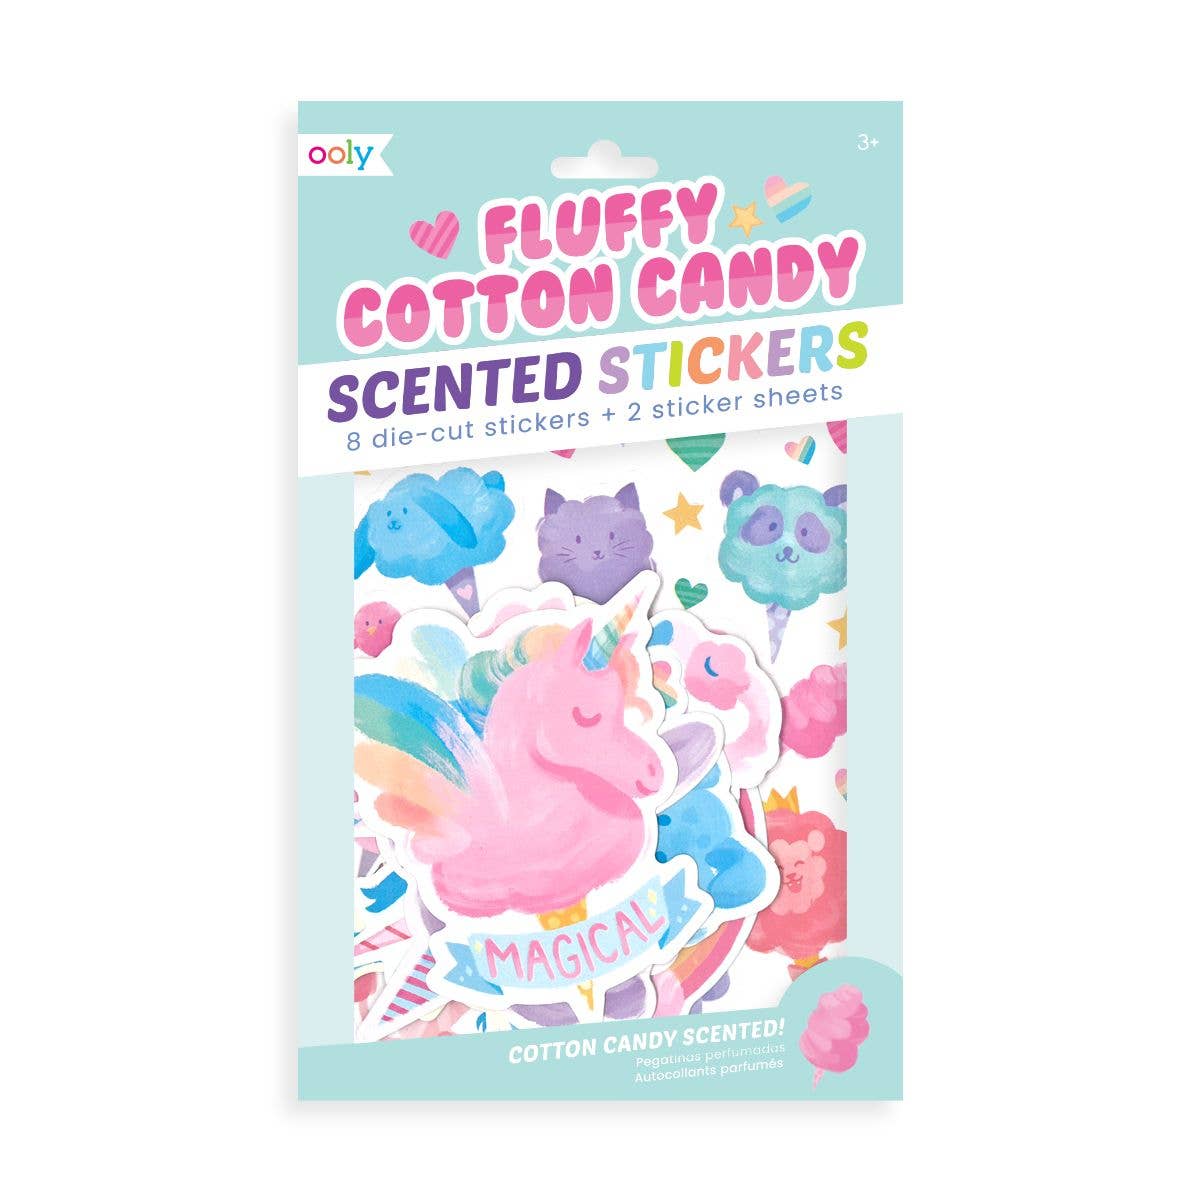 OOLY - Fluffy Cotton Candy Scented Stickers